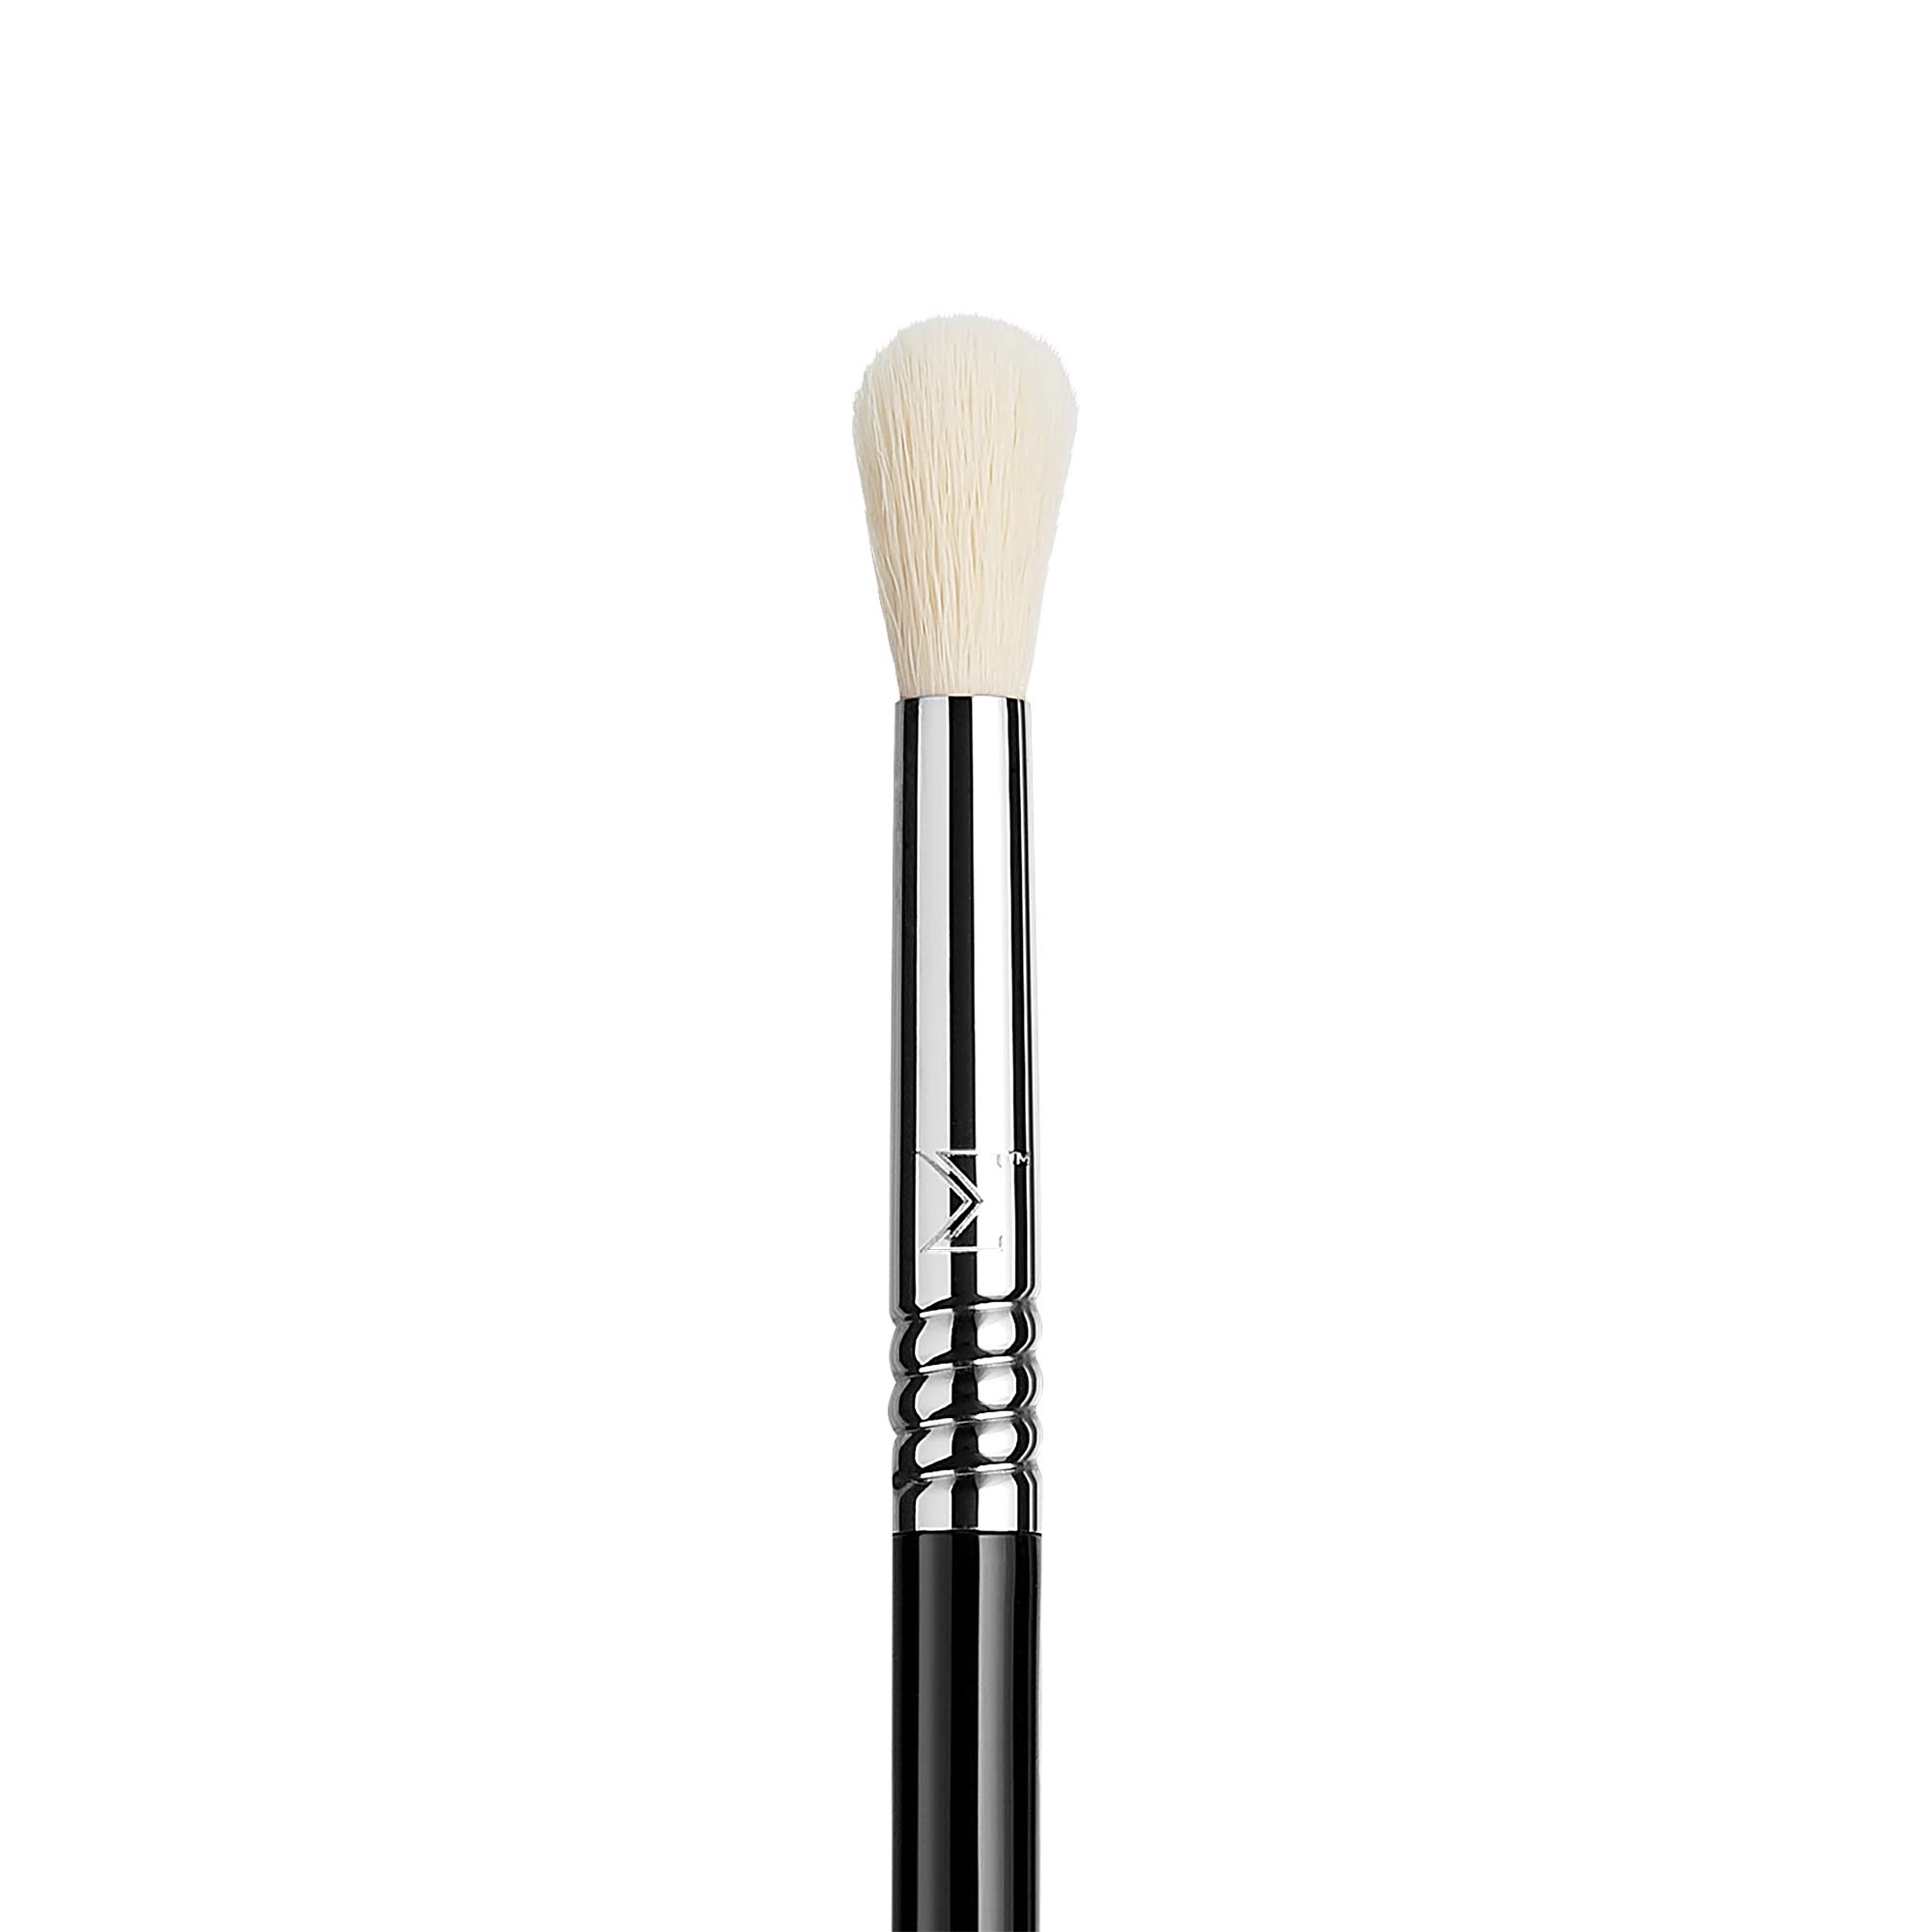 Sigma Beauty Professional E35 Tapered Blending Synthetic Eye Makeup Brush with SigmaTech® fibers for Highlighting, Lining and Blending Eyes